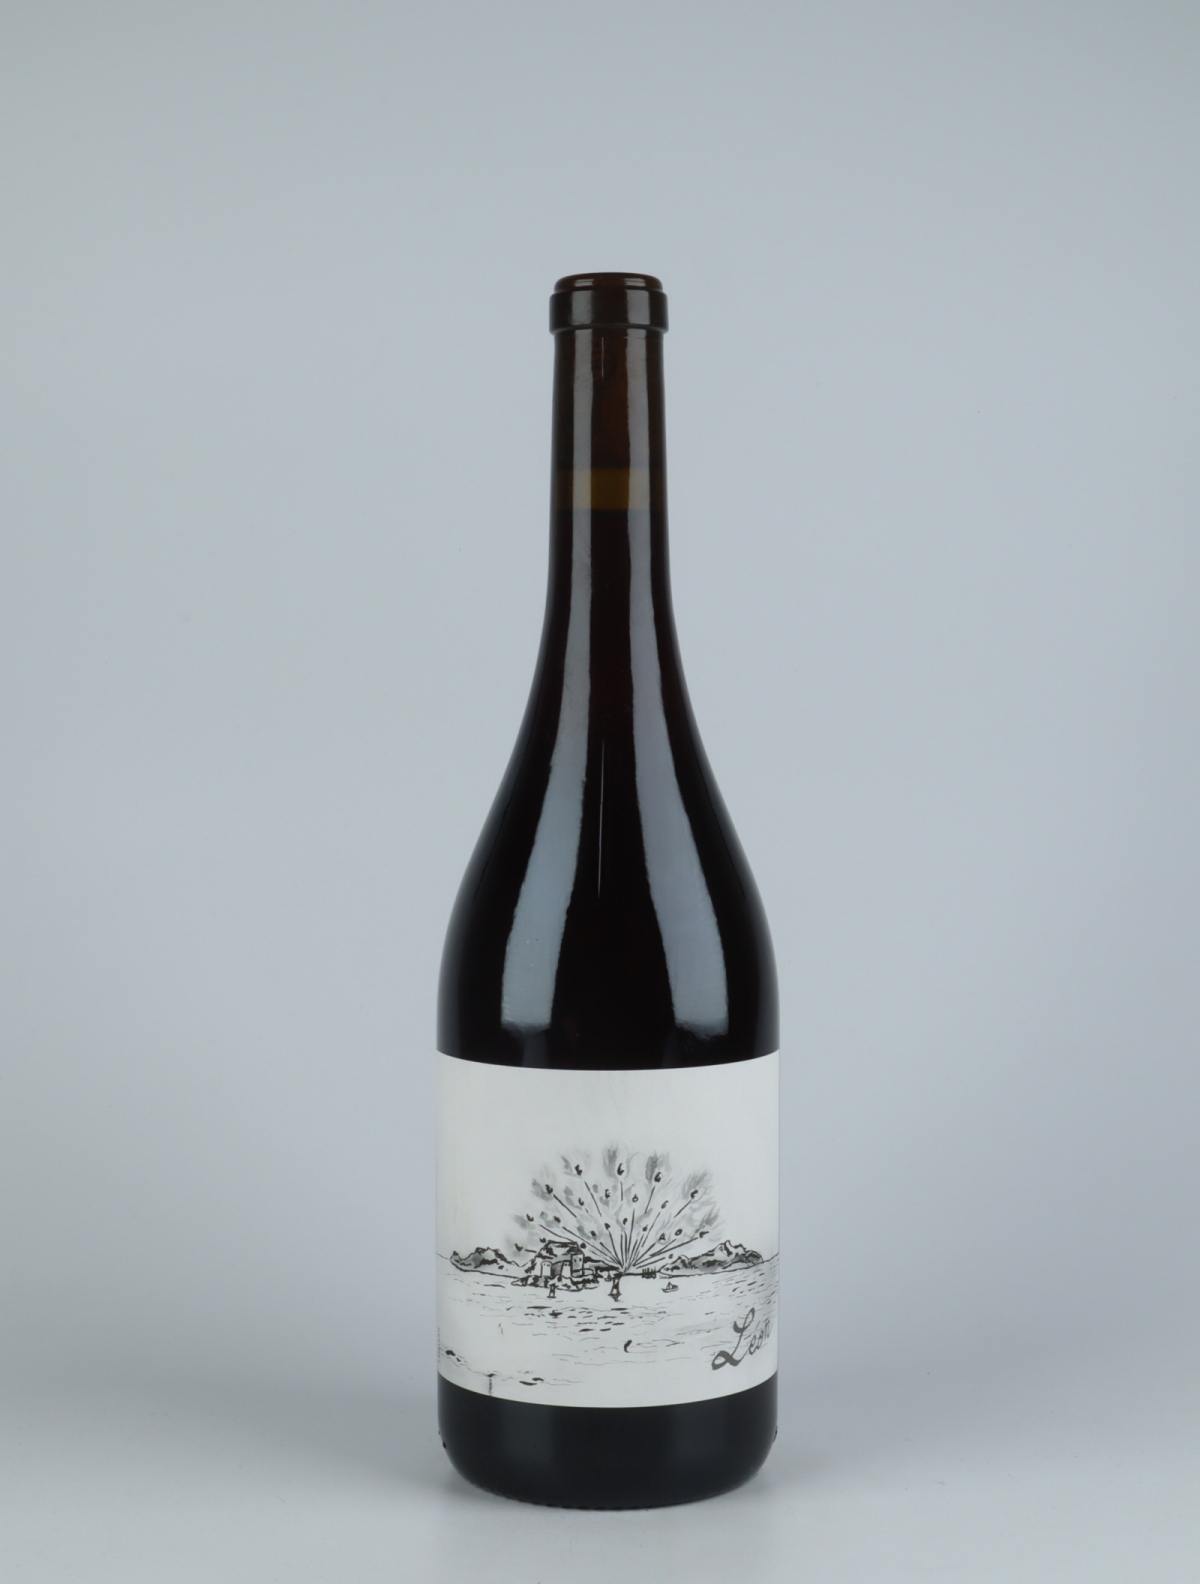 A bottle 2020 Léon Red wine from Ad Vinum, Gard in France